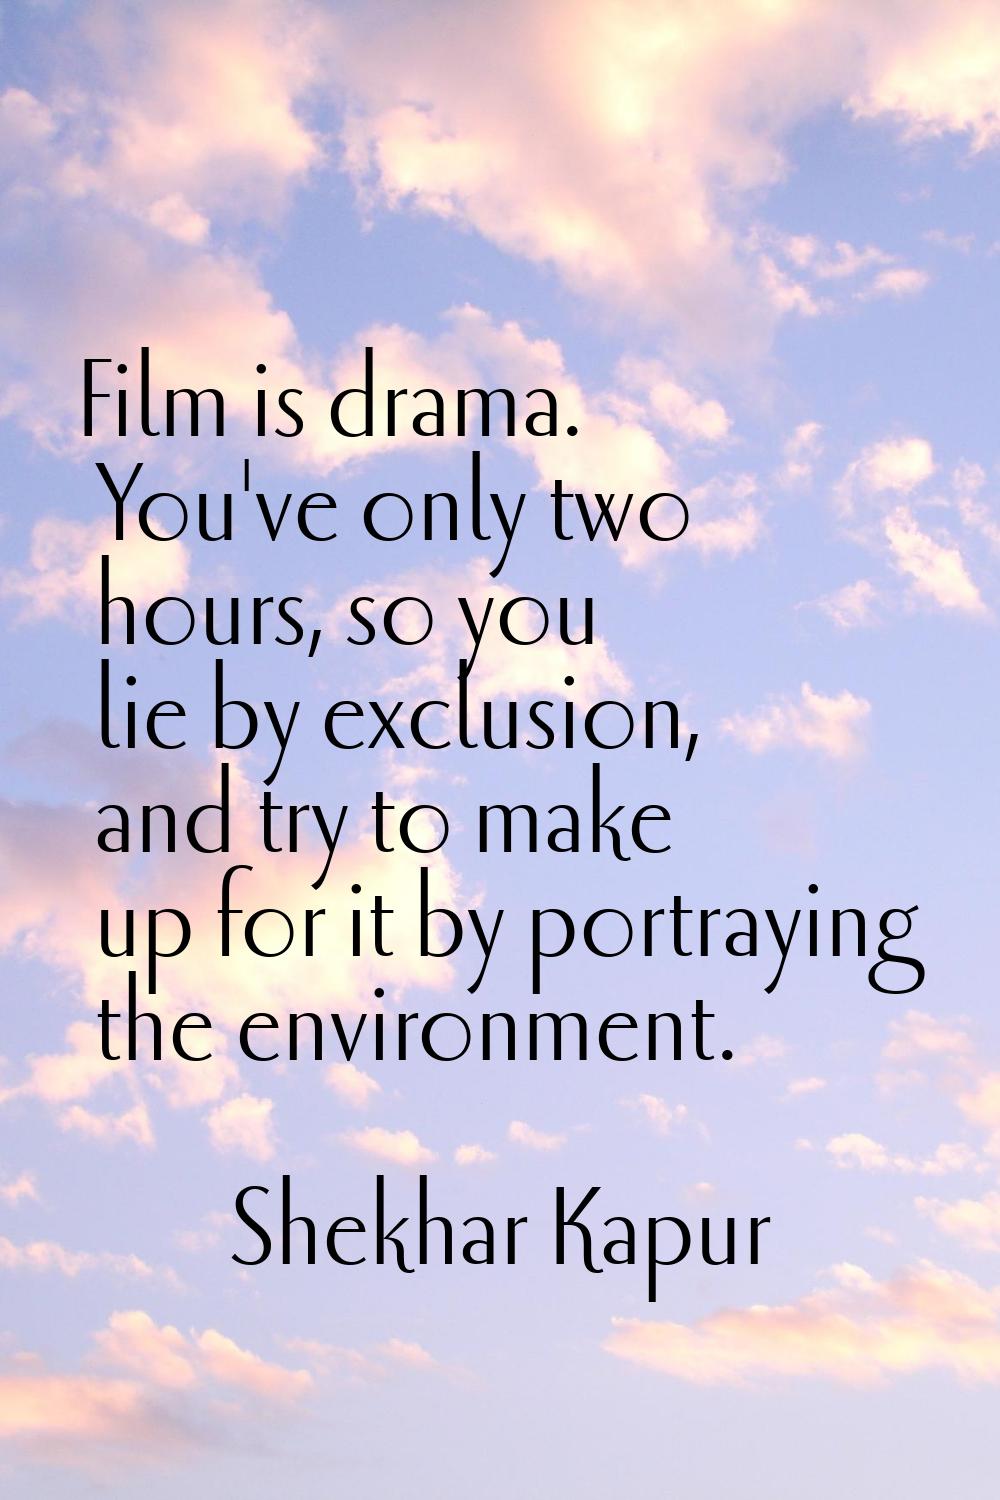 Film is drama. You've only two hours, so you lie by exclusion, and try to make up for it by portray